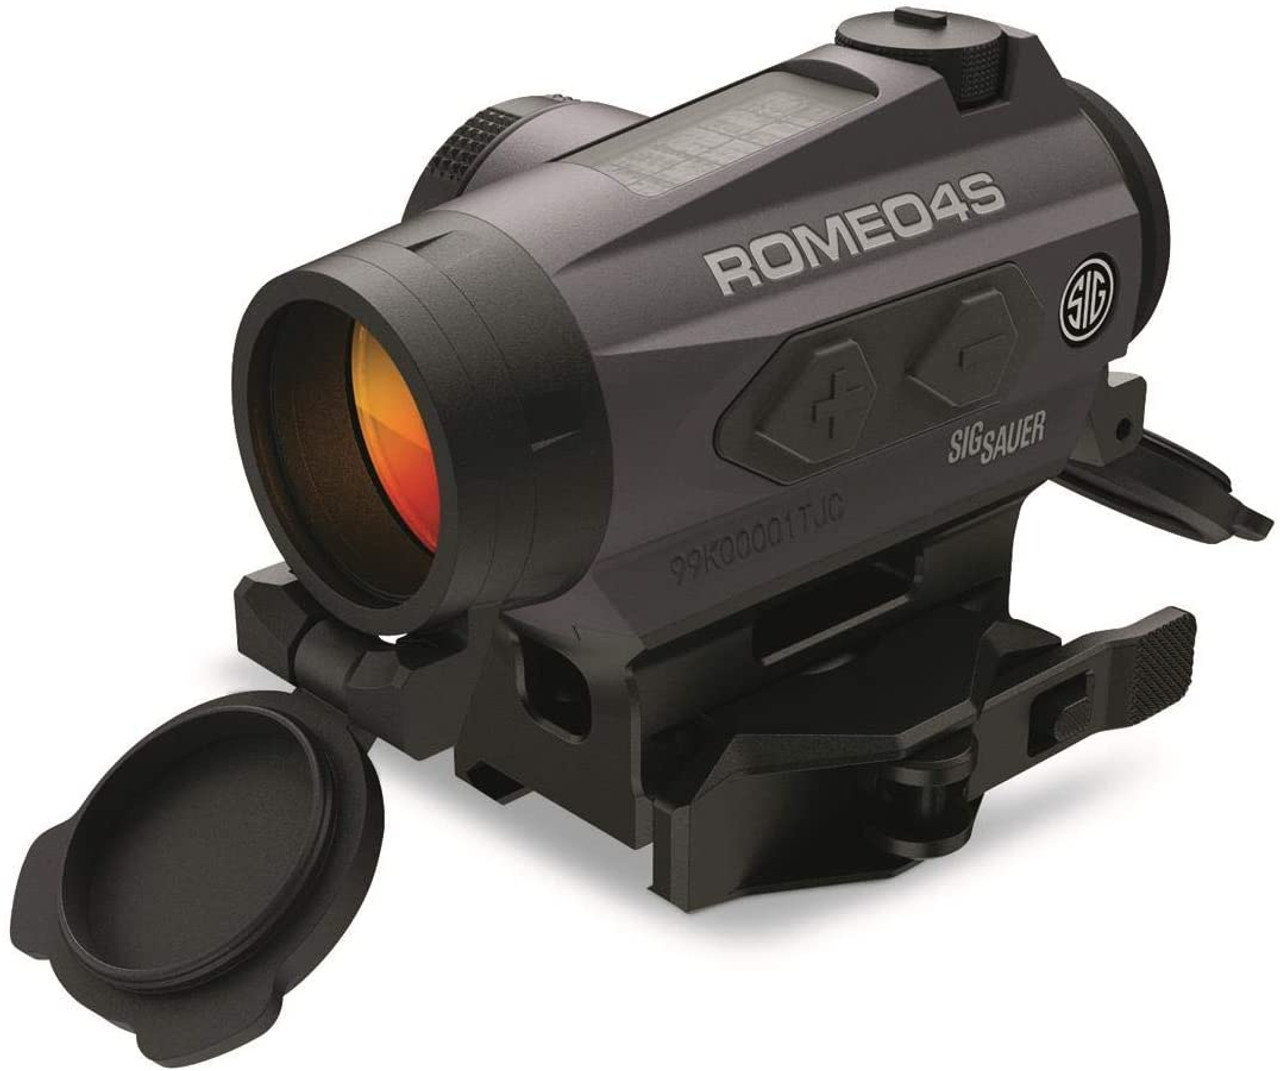 Laylax SIG SAUER ROMEO4S Dot Sight (BALLISTIC CIRCLE DOT Reticle) Torx and Quick-Release Mounts Graphite